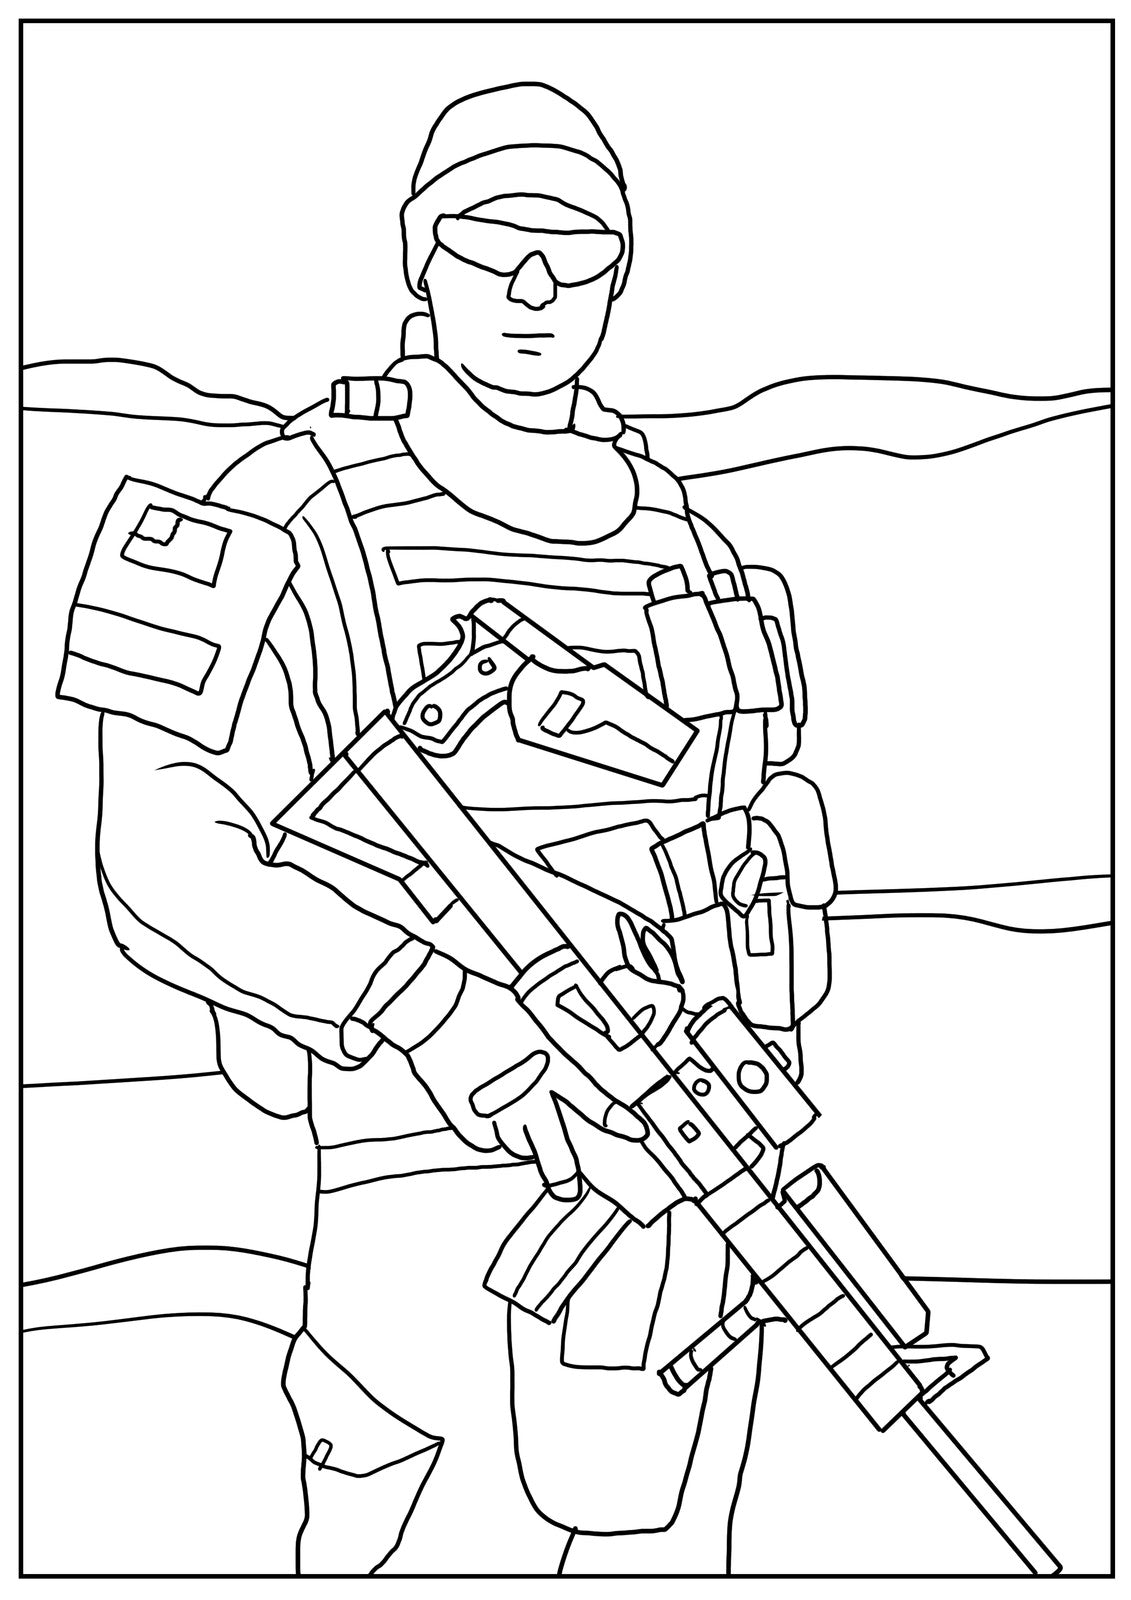 Black Ops - Military American Special Forces In Action, PDF Coloring Book